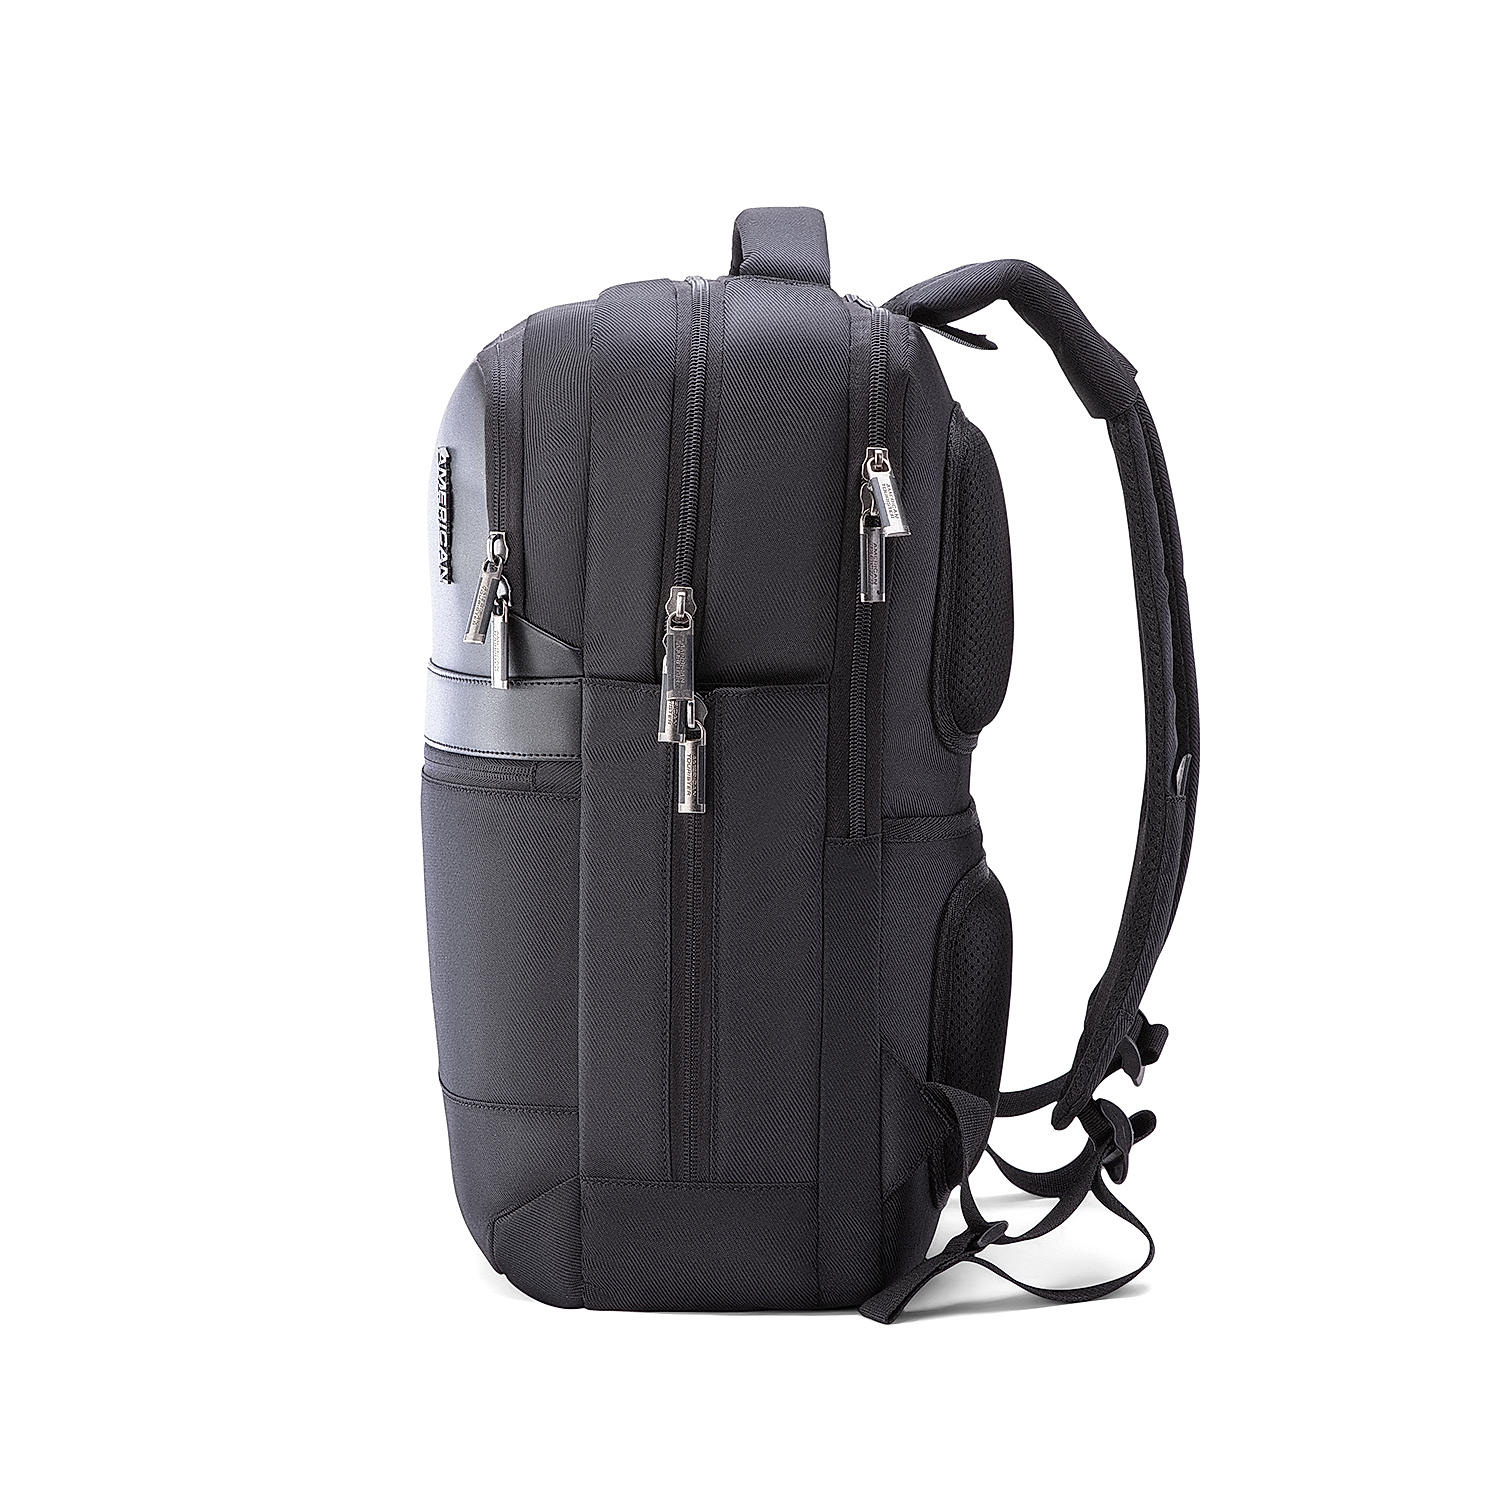 Buy Black Rubio Backpack 02 for Office Online at American Tourister ...